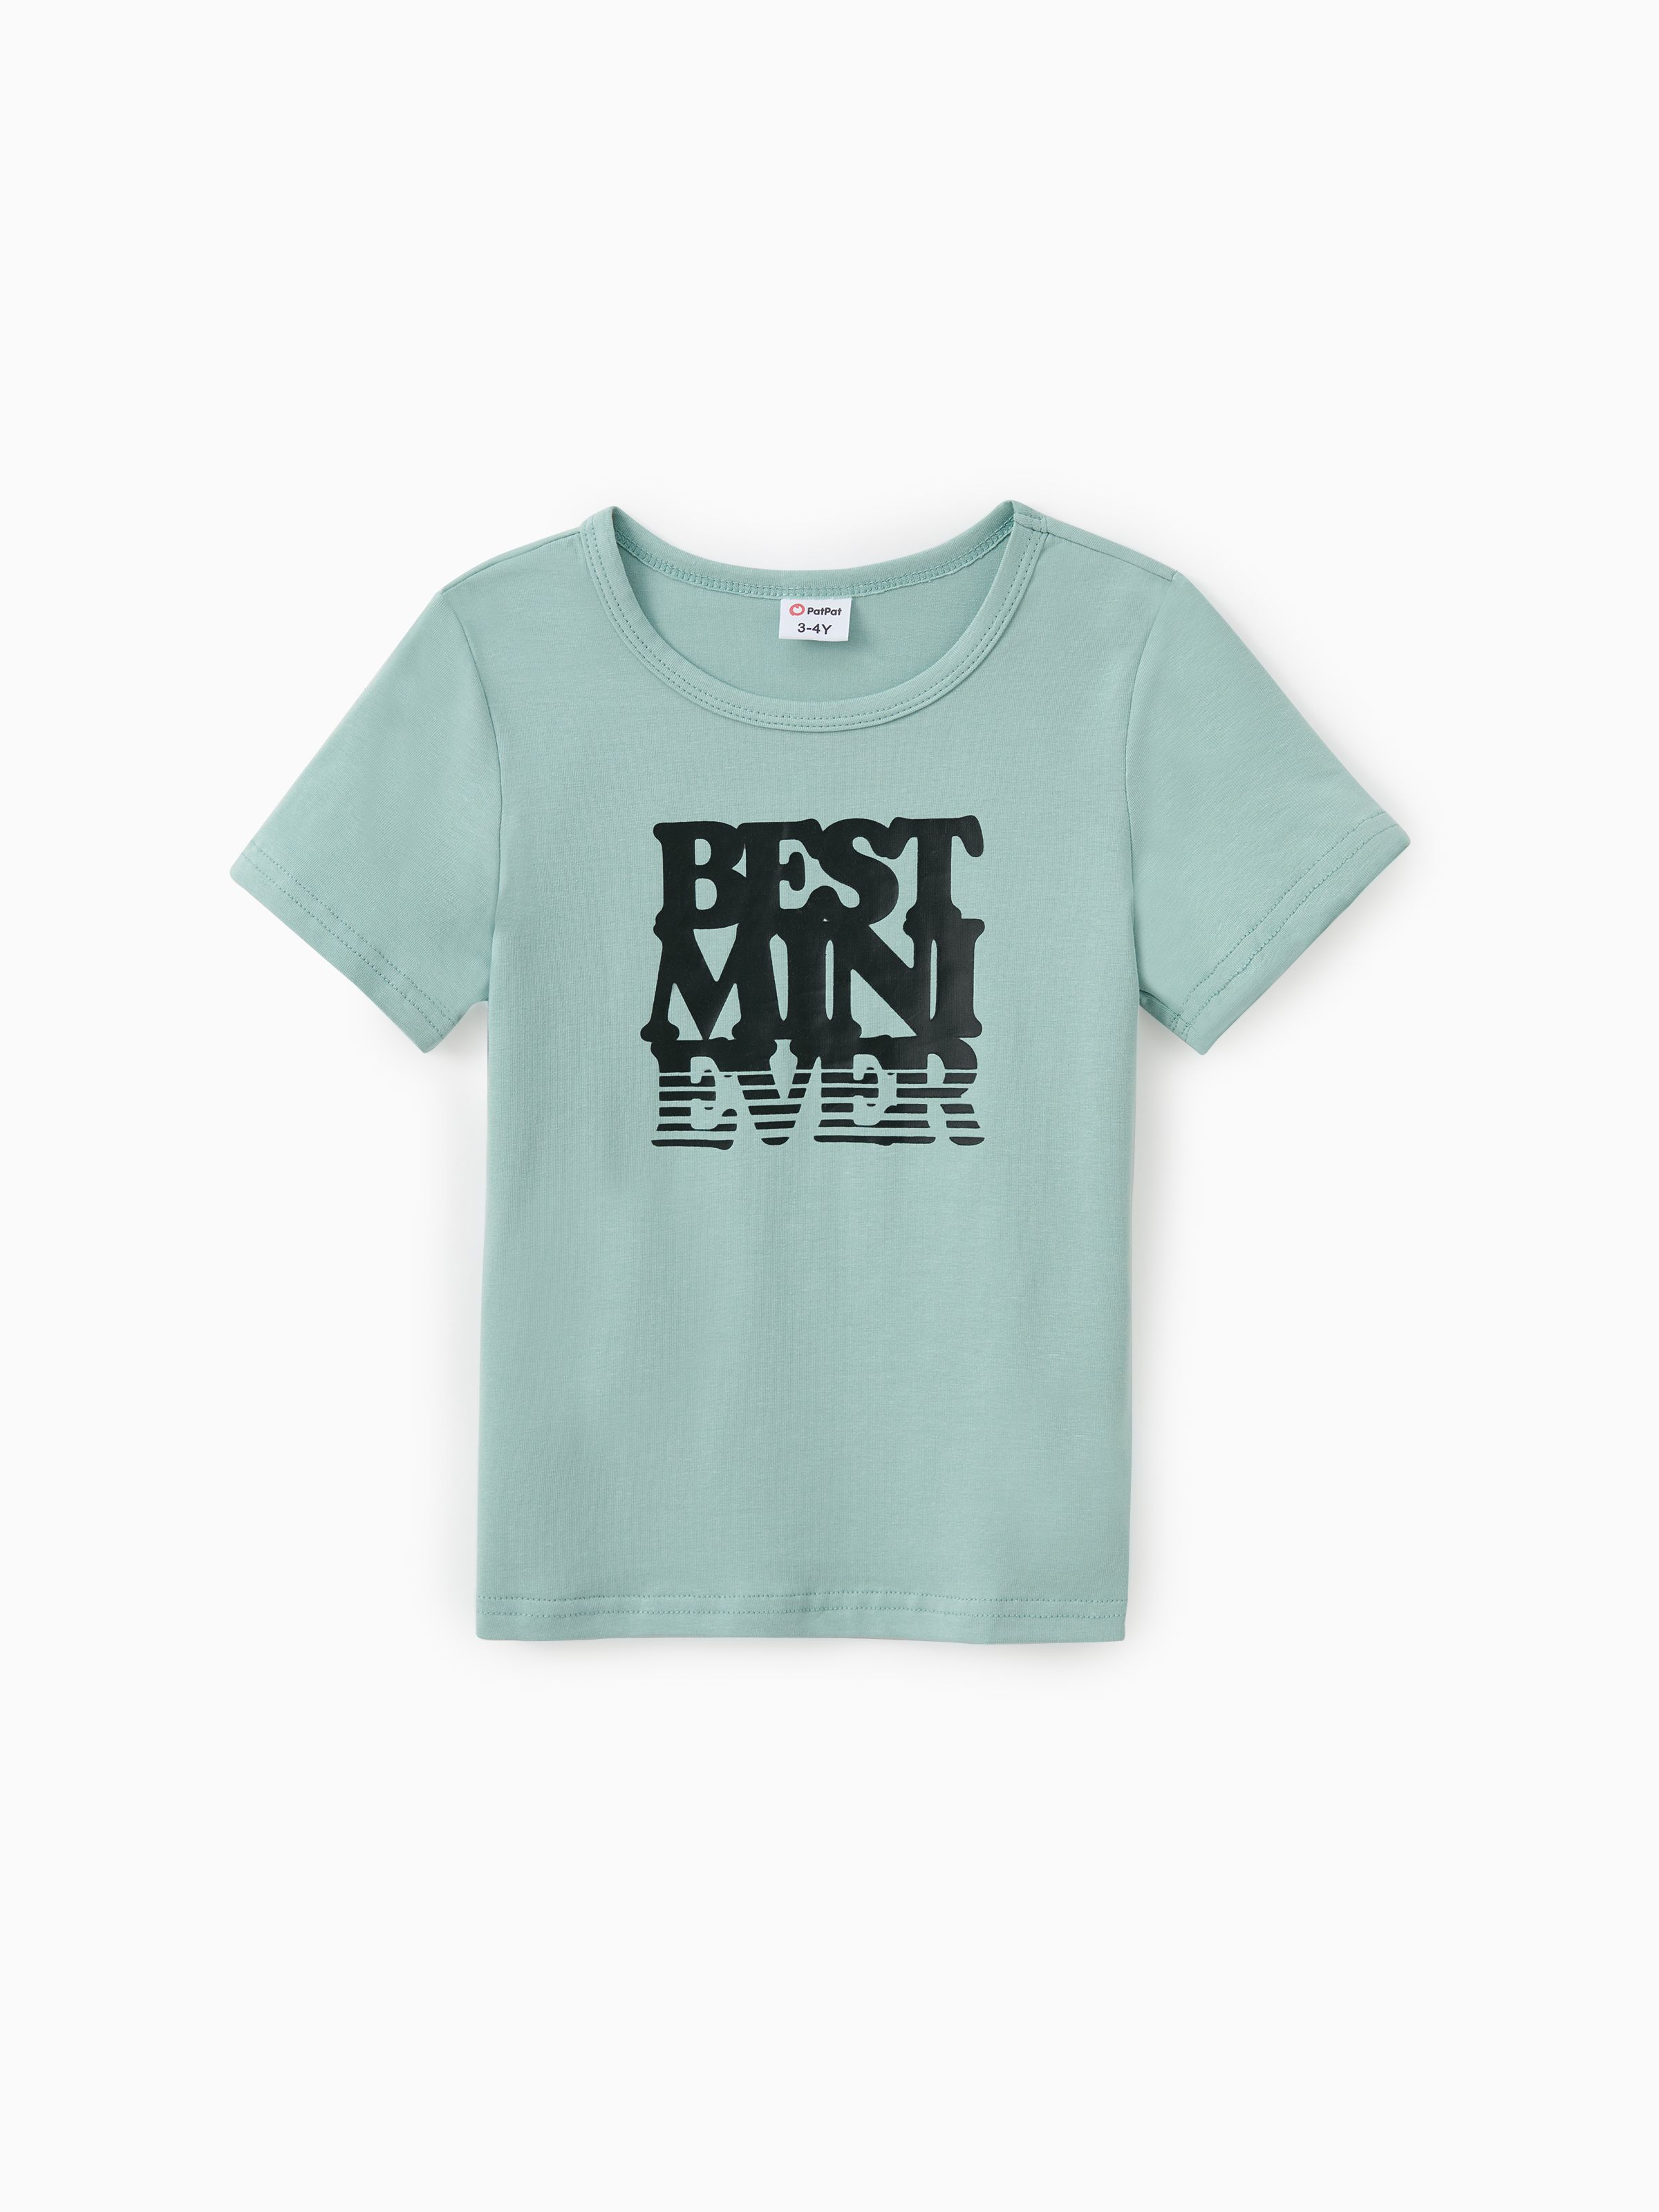 

Family Matching Tops Solid Color Short Sleeves Cotton Unique Text Printed Tee